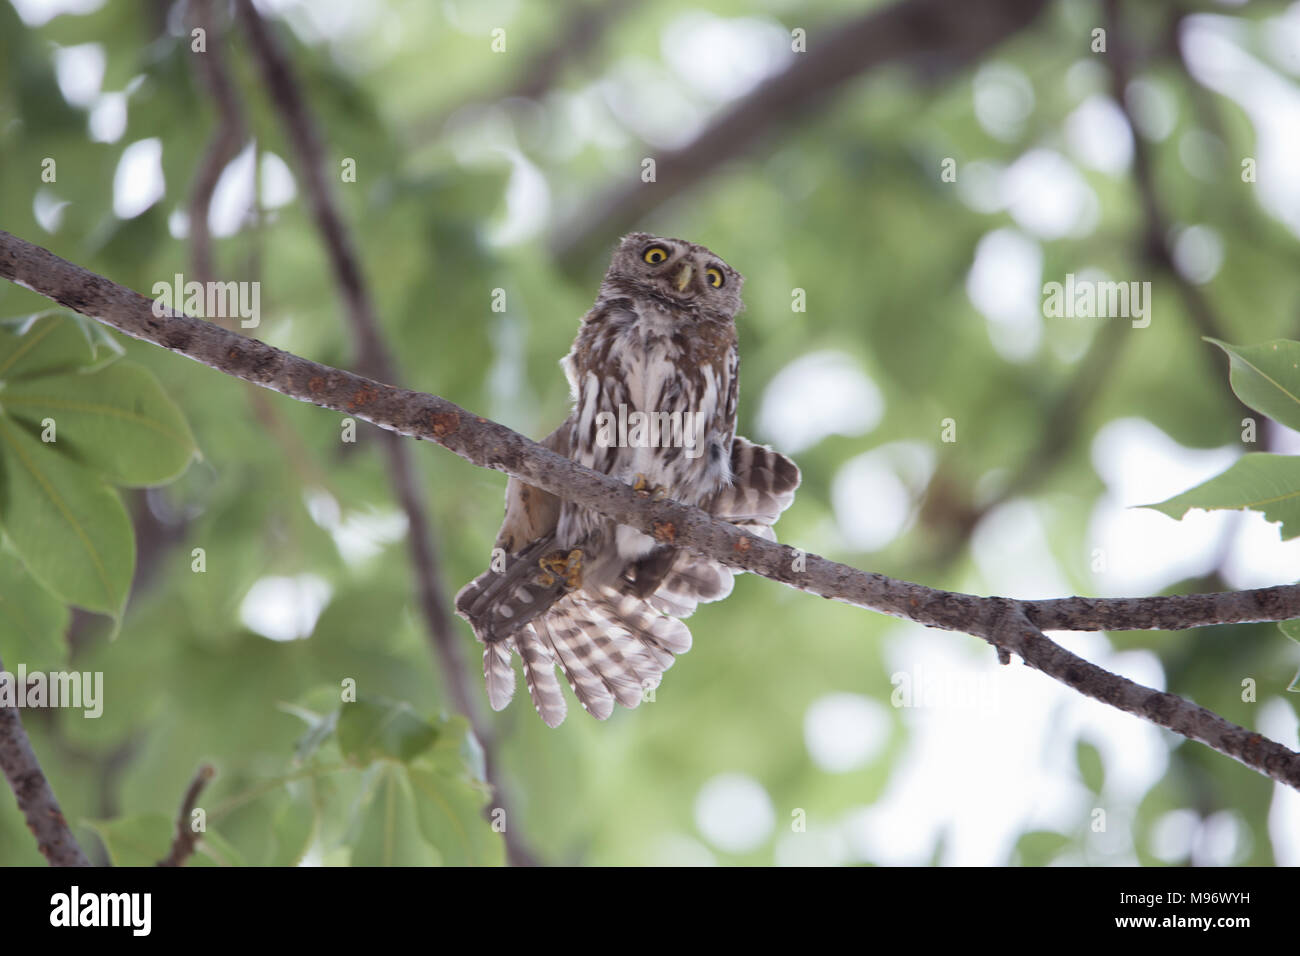 Owlet Pearl-Spotted Banque D'Images